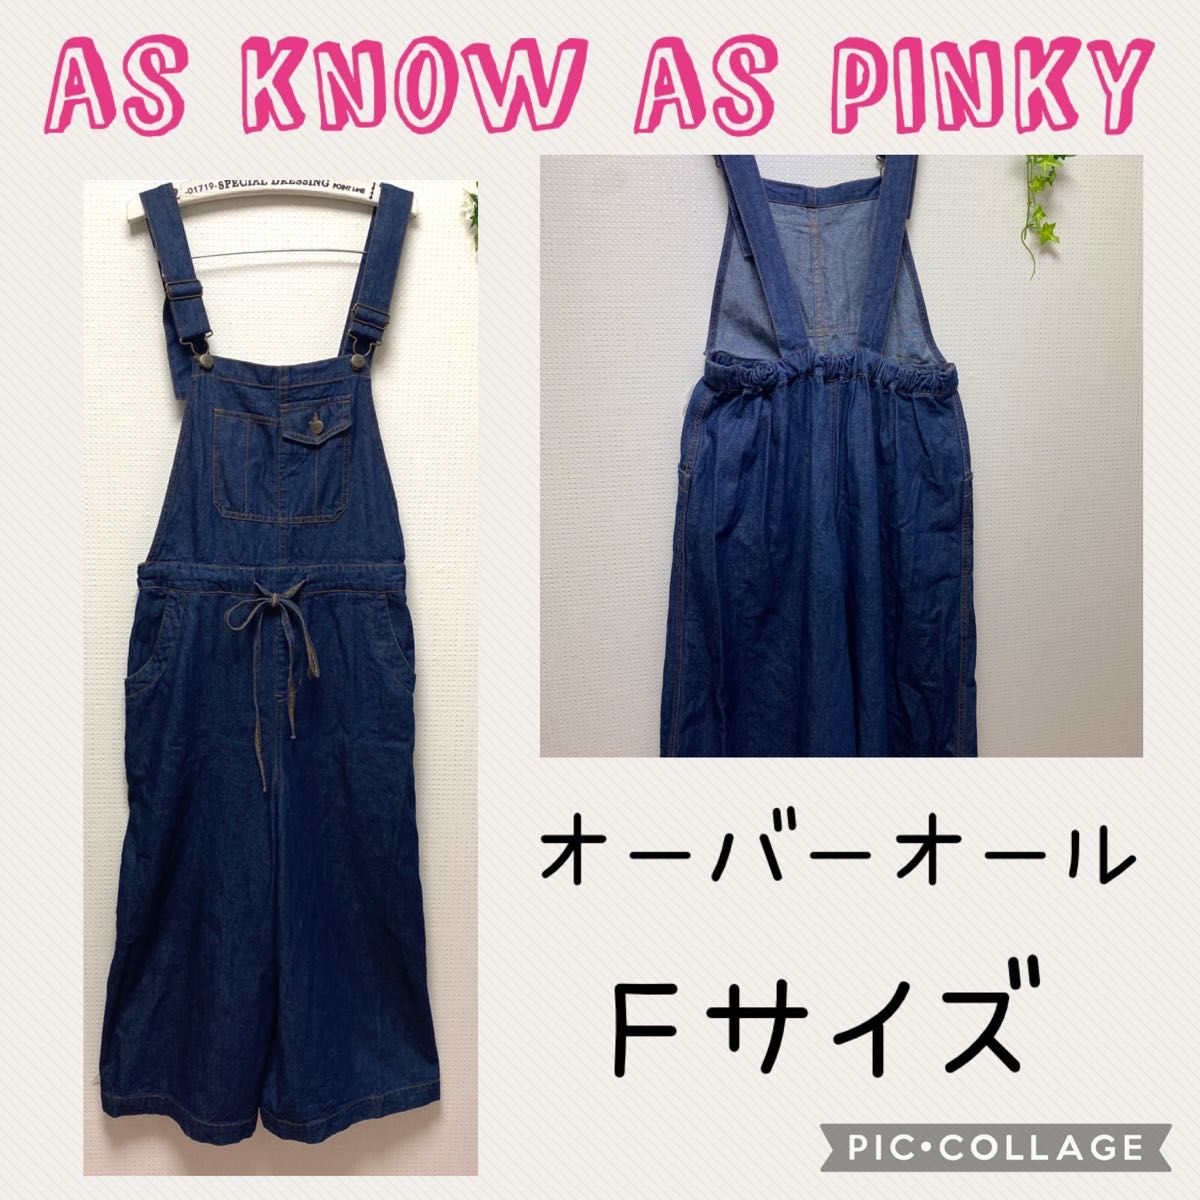 AS KNOW AS PINKY オーバーオール デニムサロペットパンツ｜PayPayフリマ